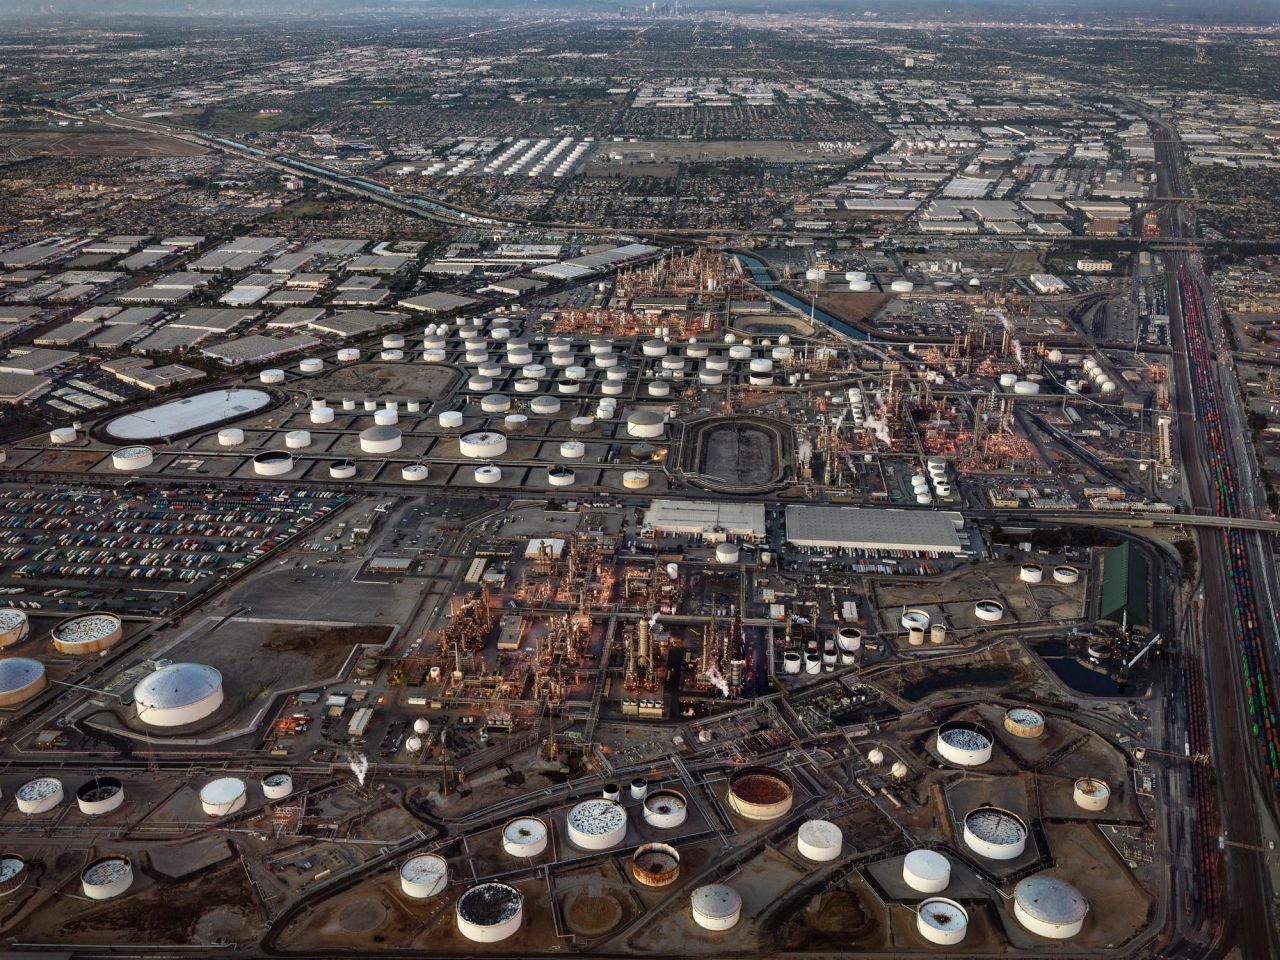 Oil refineries are seen in Carson, California, in this 2017 photo taken by <a href="https://www.edwardburtynsky.com/" target="_blank" target="_blank">Edward Burtynsky</a> for The Anthropocene Project, which explores how humans have contributed to climate change and the state the planet is in today. Part of <a href="https://theanthropocene.org/" target="_blank" target="_blank">the project</a> includes a film, "Anthropocene: The Human Epoch," that opens September 25 in 100 theaters across the United States.